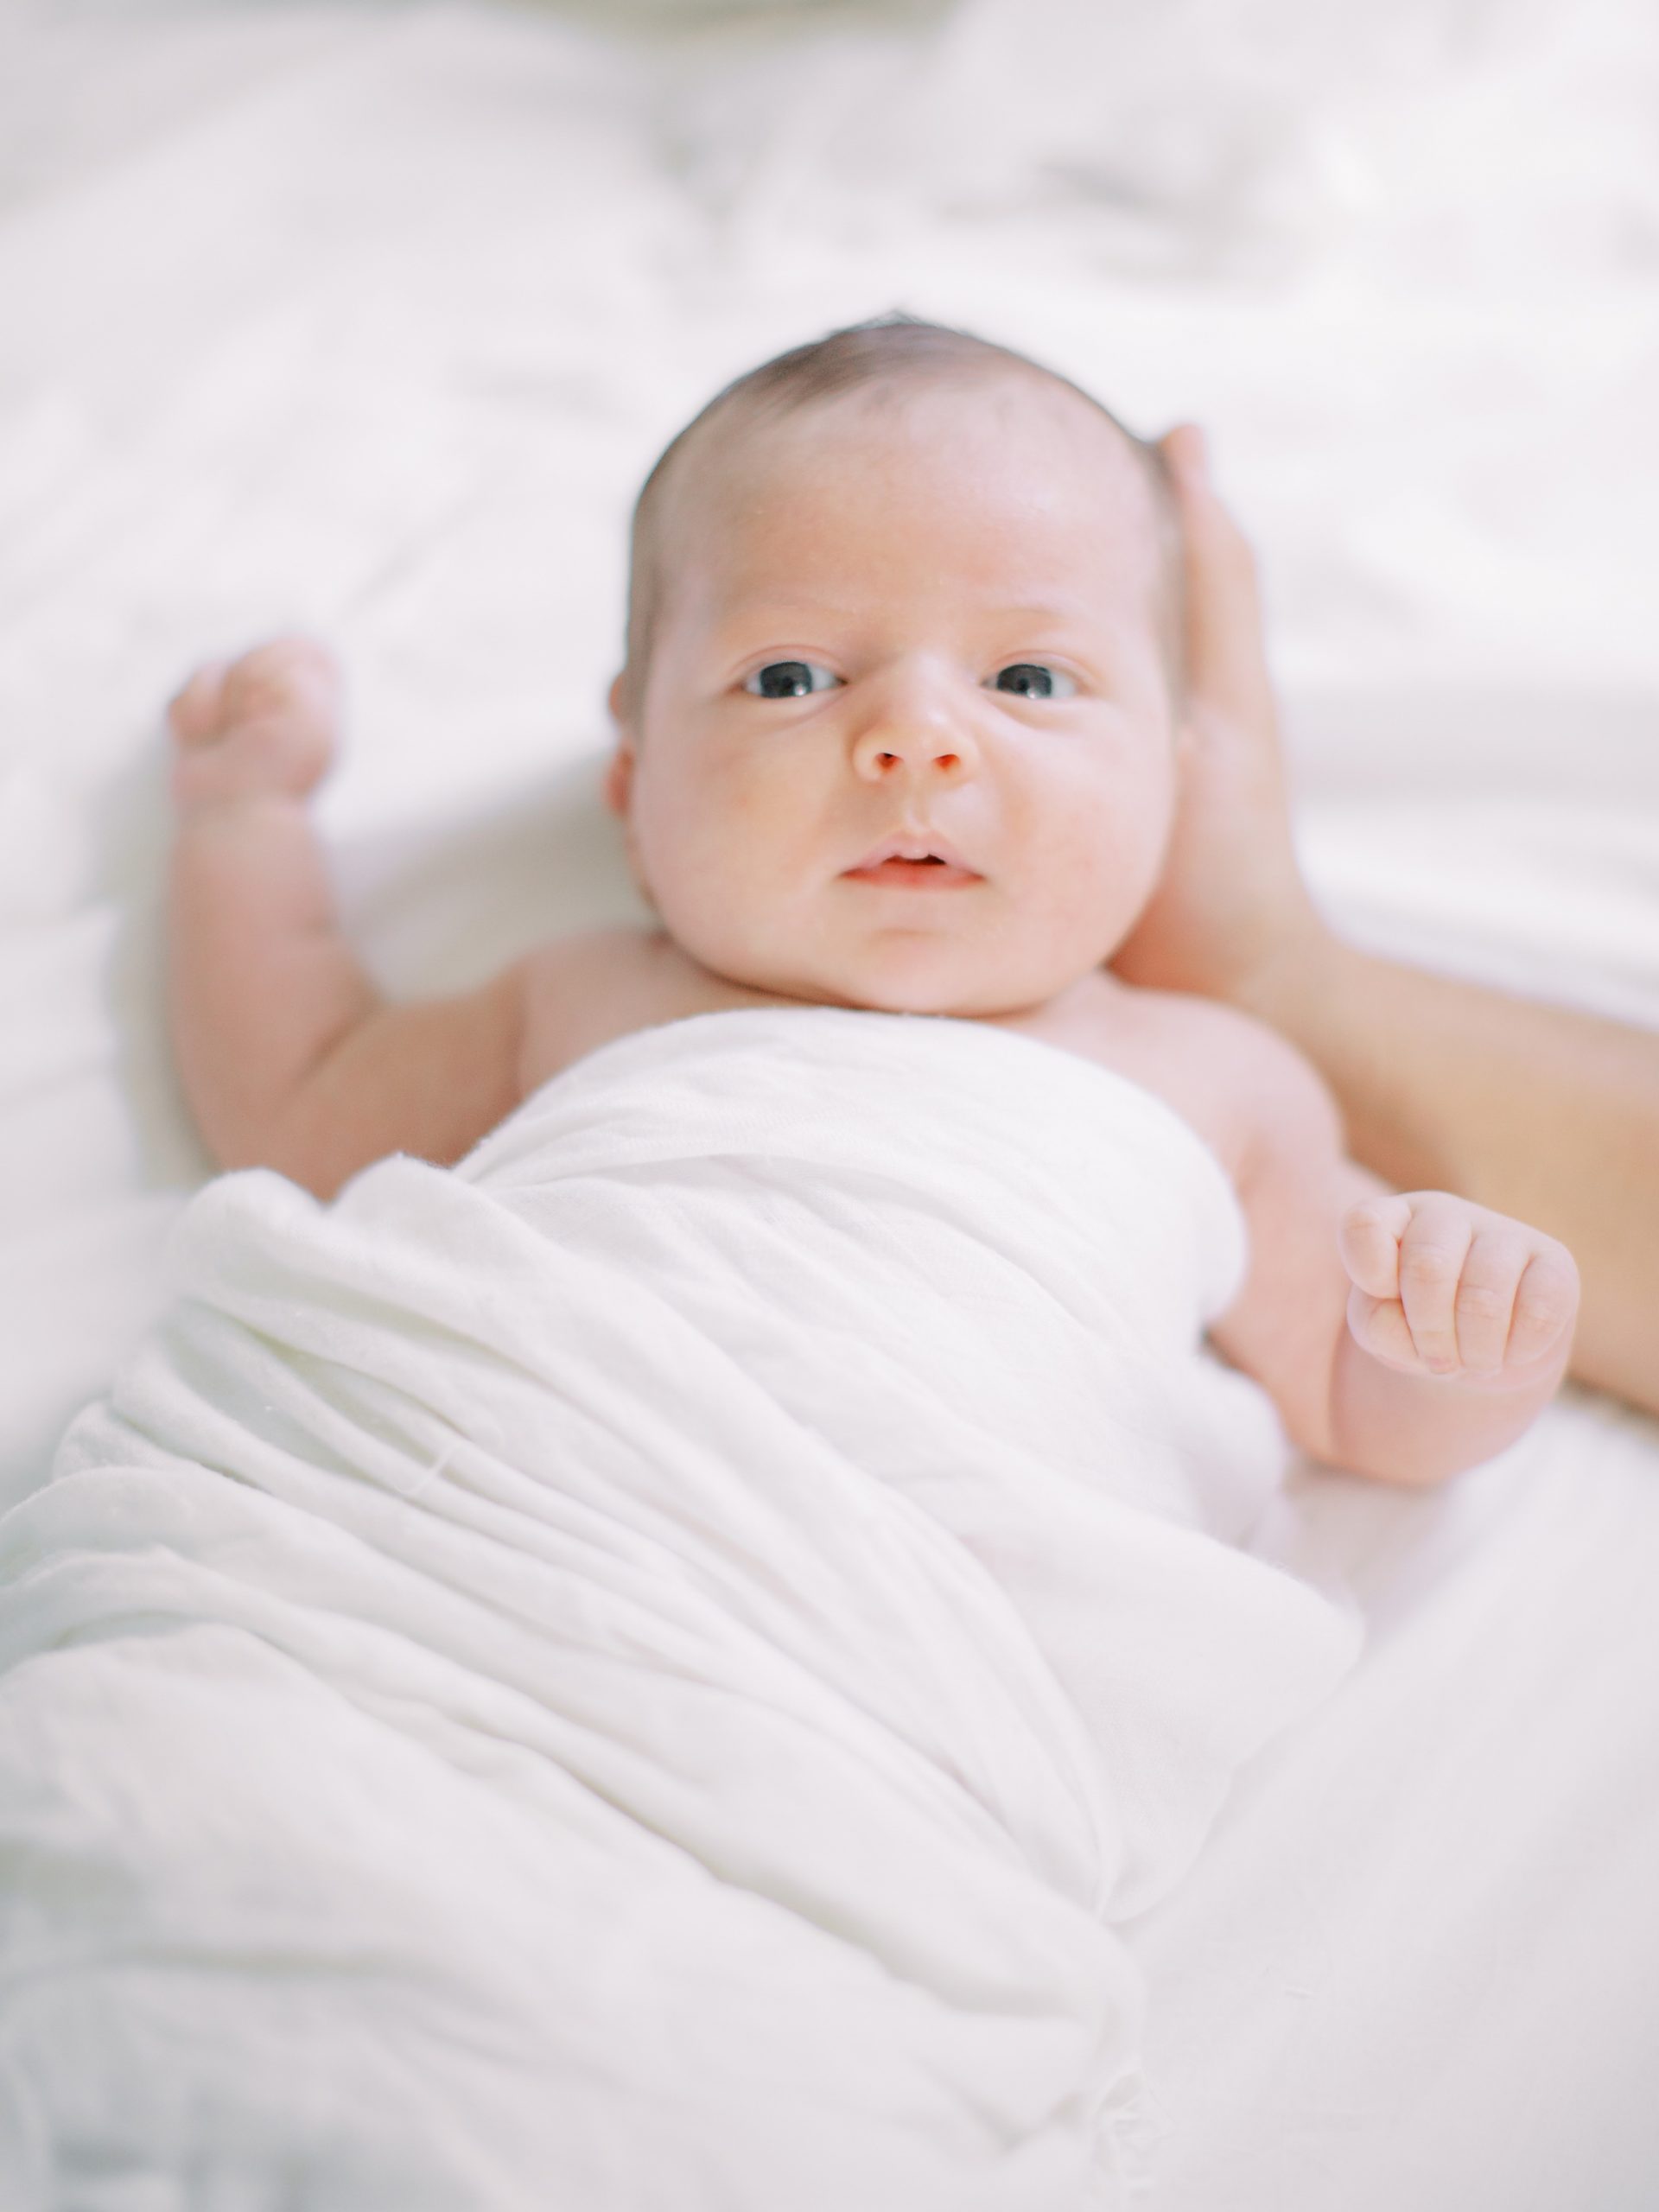 baby boy in white swaddle lays on bed